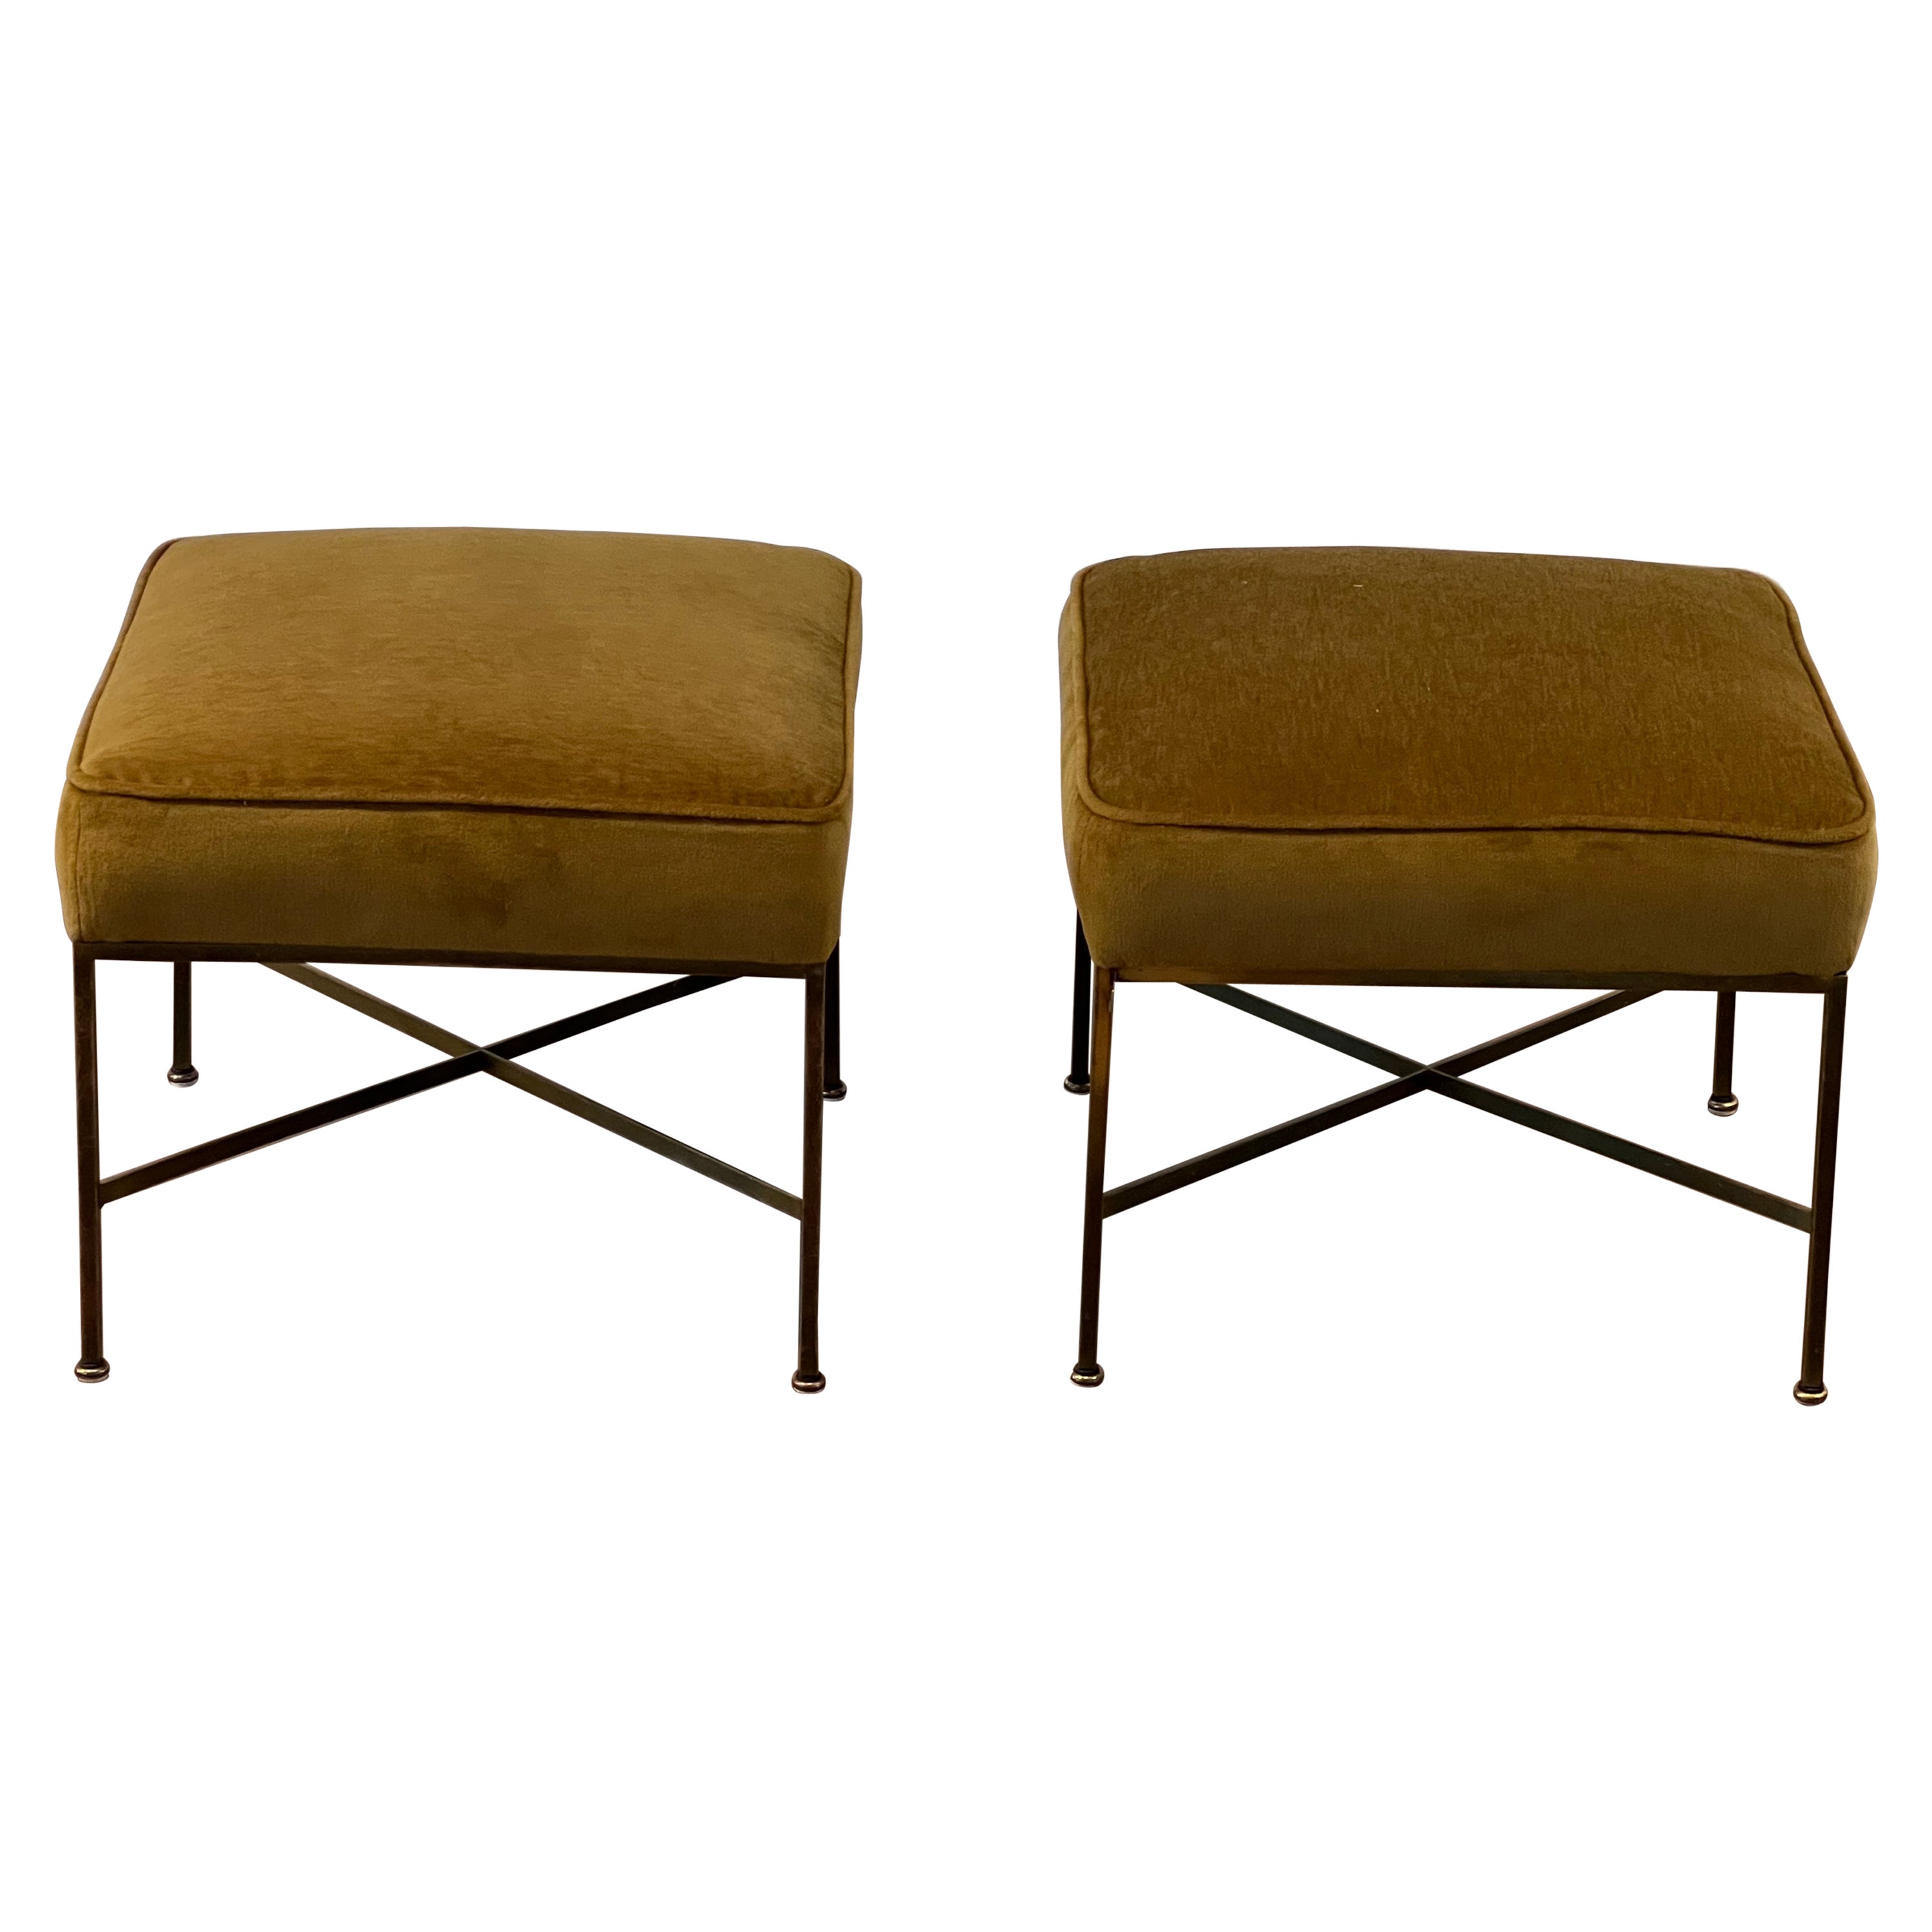 Pair of Brass Paul McCobb Ottomans In Mohair  For Sale